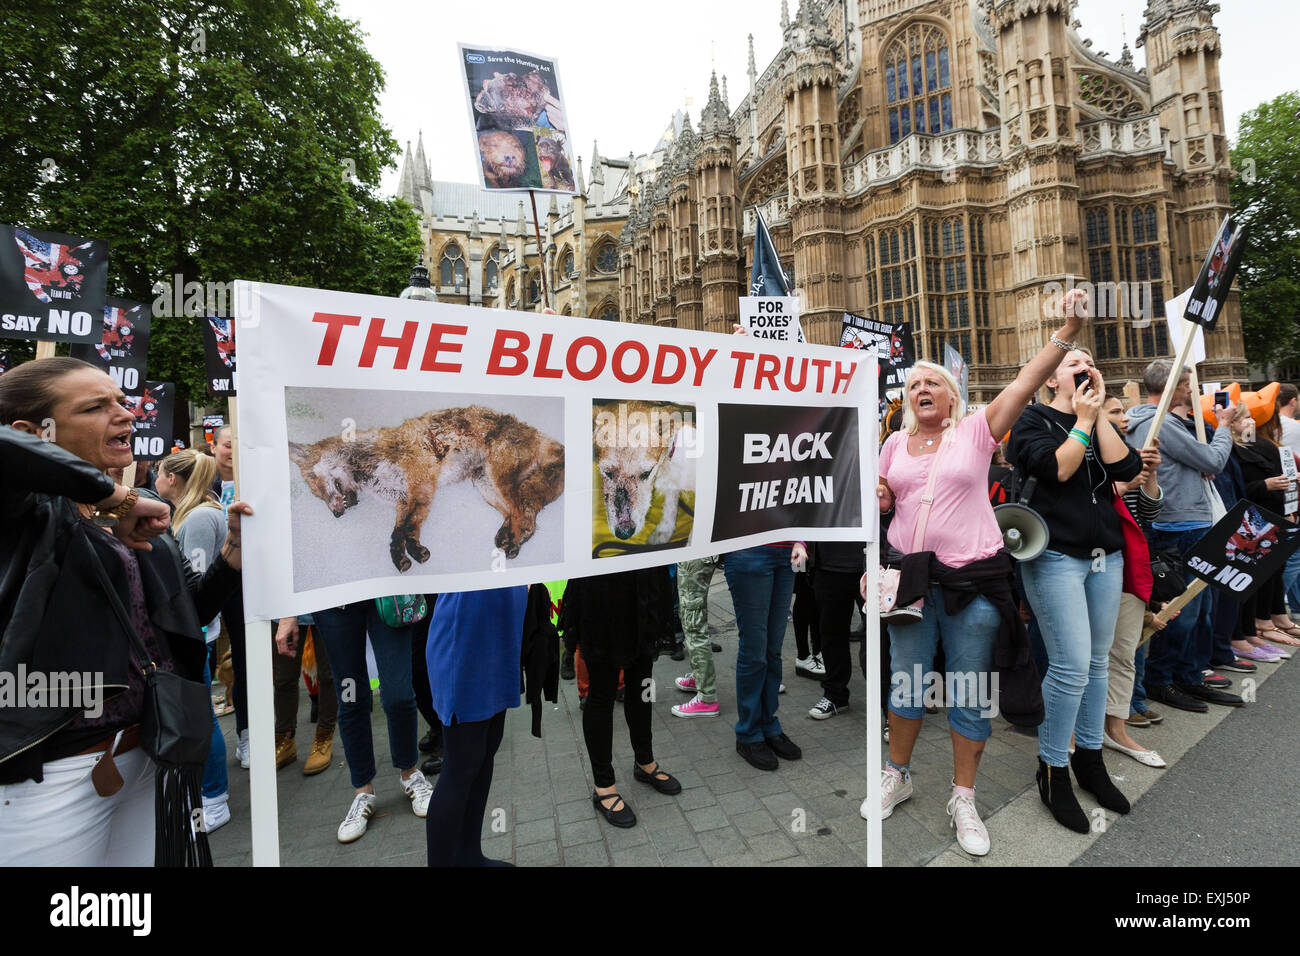 London, UK. 14th July 2015. Demonstrators take part in a rally to protest against proposed changes to the Hunting Act, outside the Houses of Parliament in London. On Wednesday, MPÕs will take a free vote on an amendment to the Hunting Act, removing the limit on the number of dogs allowed to flush out foxes and wild animals. Protesters claim that if passed, the amendment would effectively make make fox hunting legal again. Credit:  London pix/Alamy Live News Stock Photo